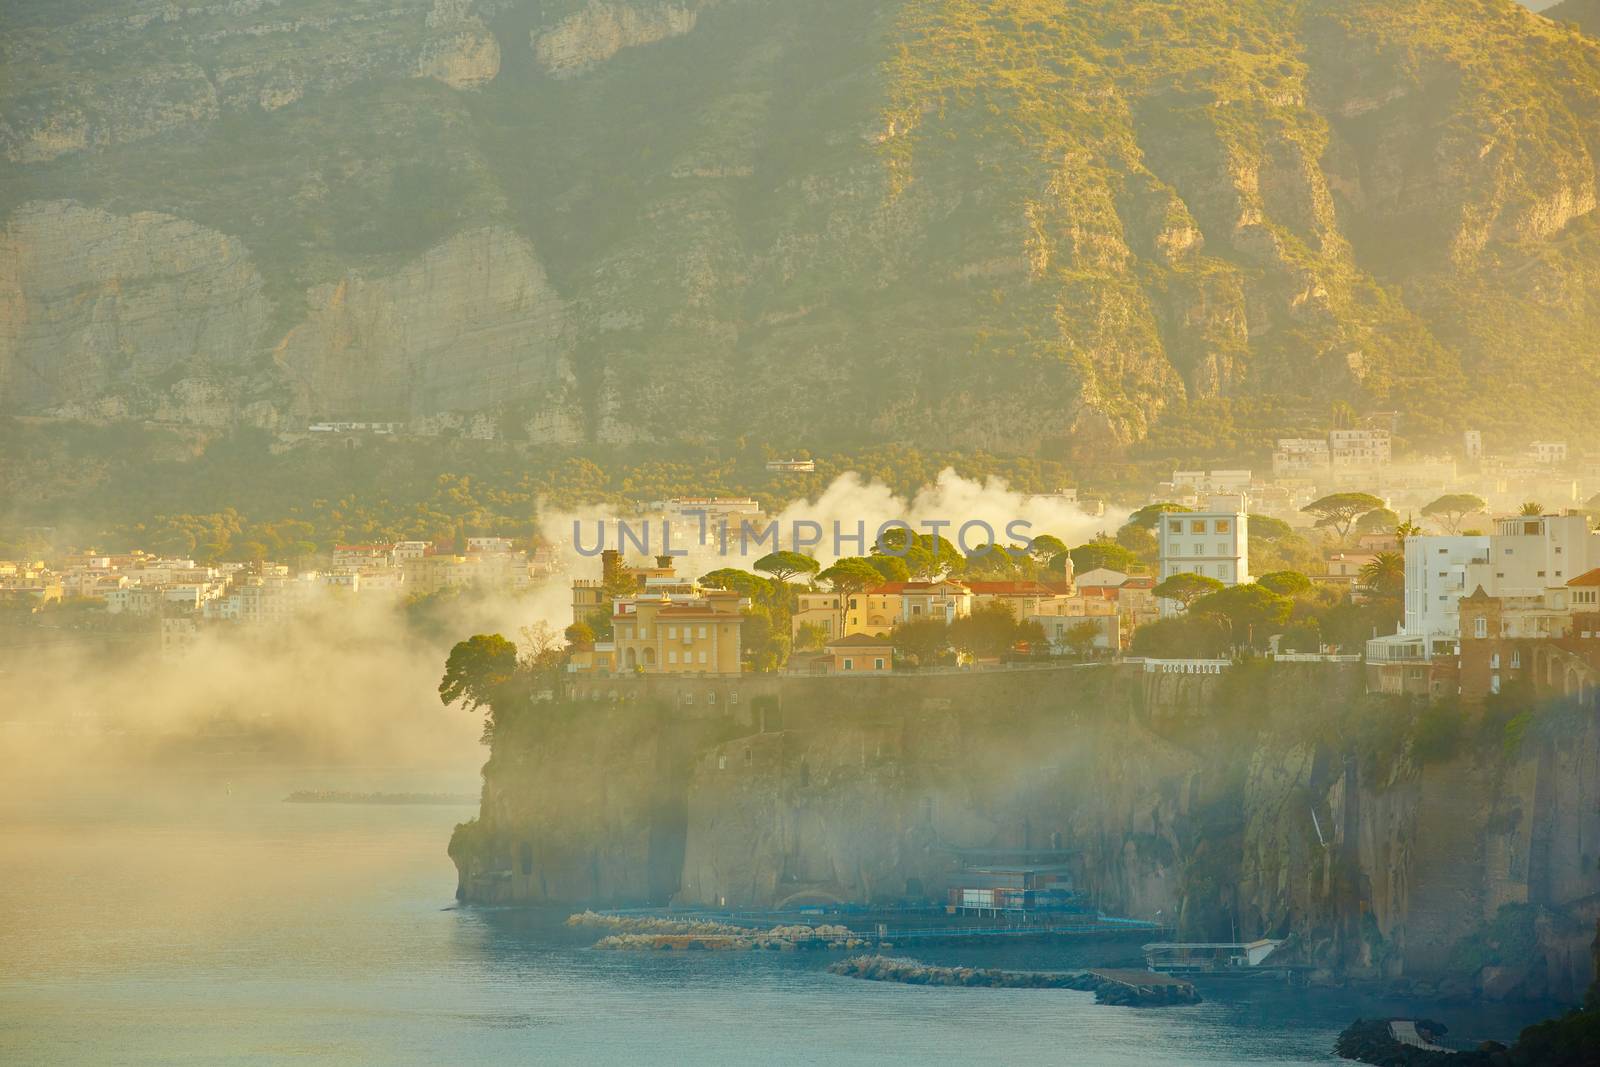 Sorrento, Italy - November 8, 2013: Sorrento is one of the towns of the Amalfi Coast,expensive and most beautiful European resort.